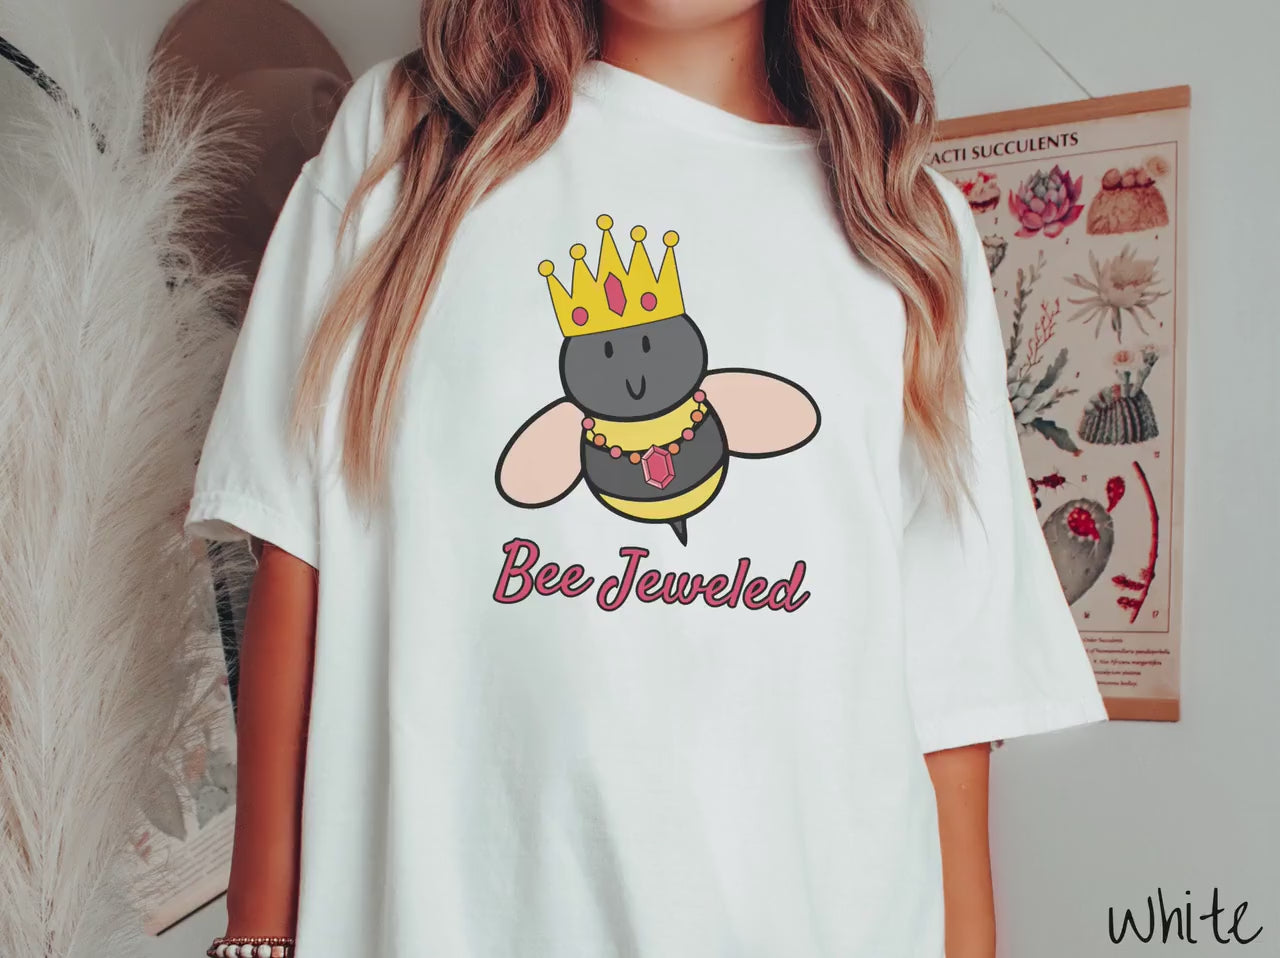 The Bee Jeweled Comfort Colors Shirt, Gift this Funny Bejeweled Beekeeping T-Shirt to your Pun-Loving Friends!